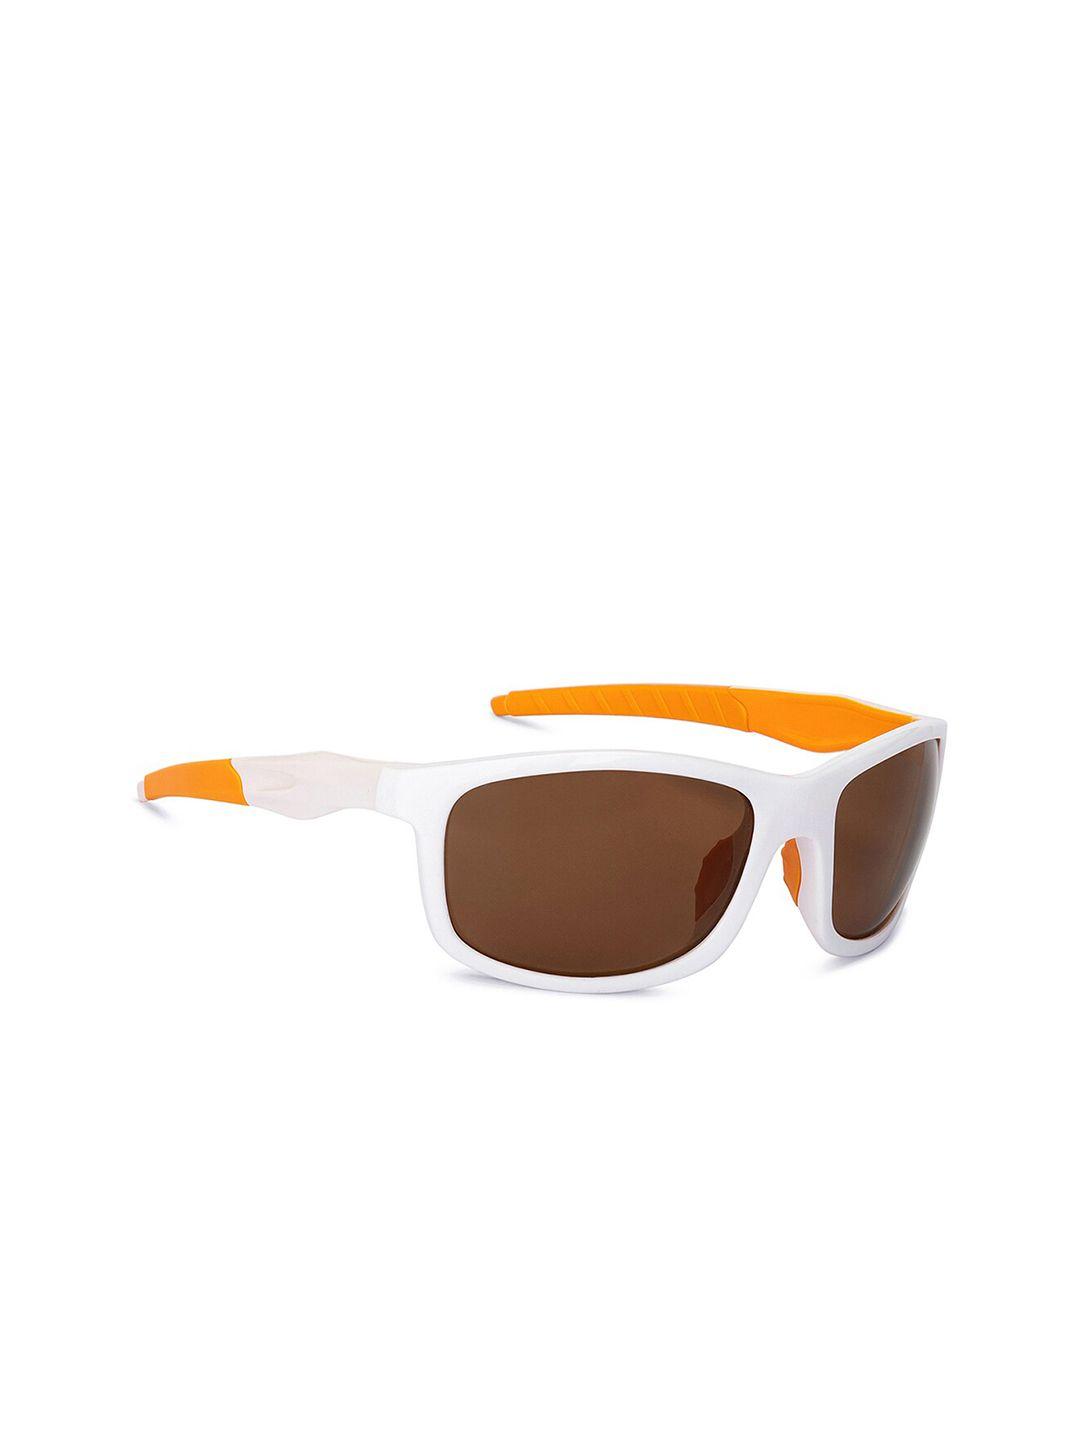 vincent-chase-full-rim-wayfarer-sunglasses-with-polarised-and-uv-protected-lens-200505